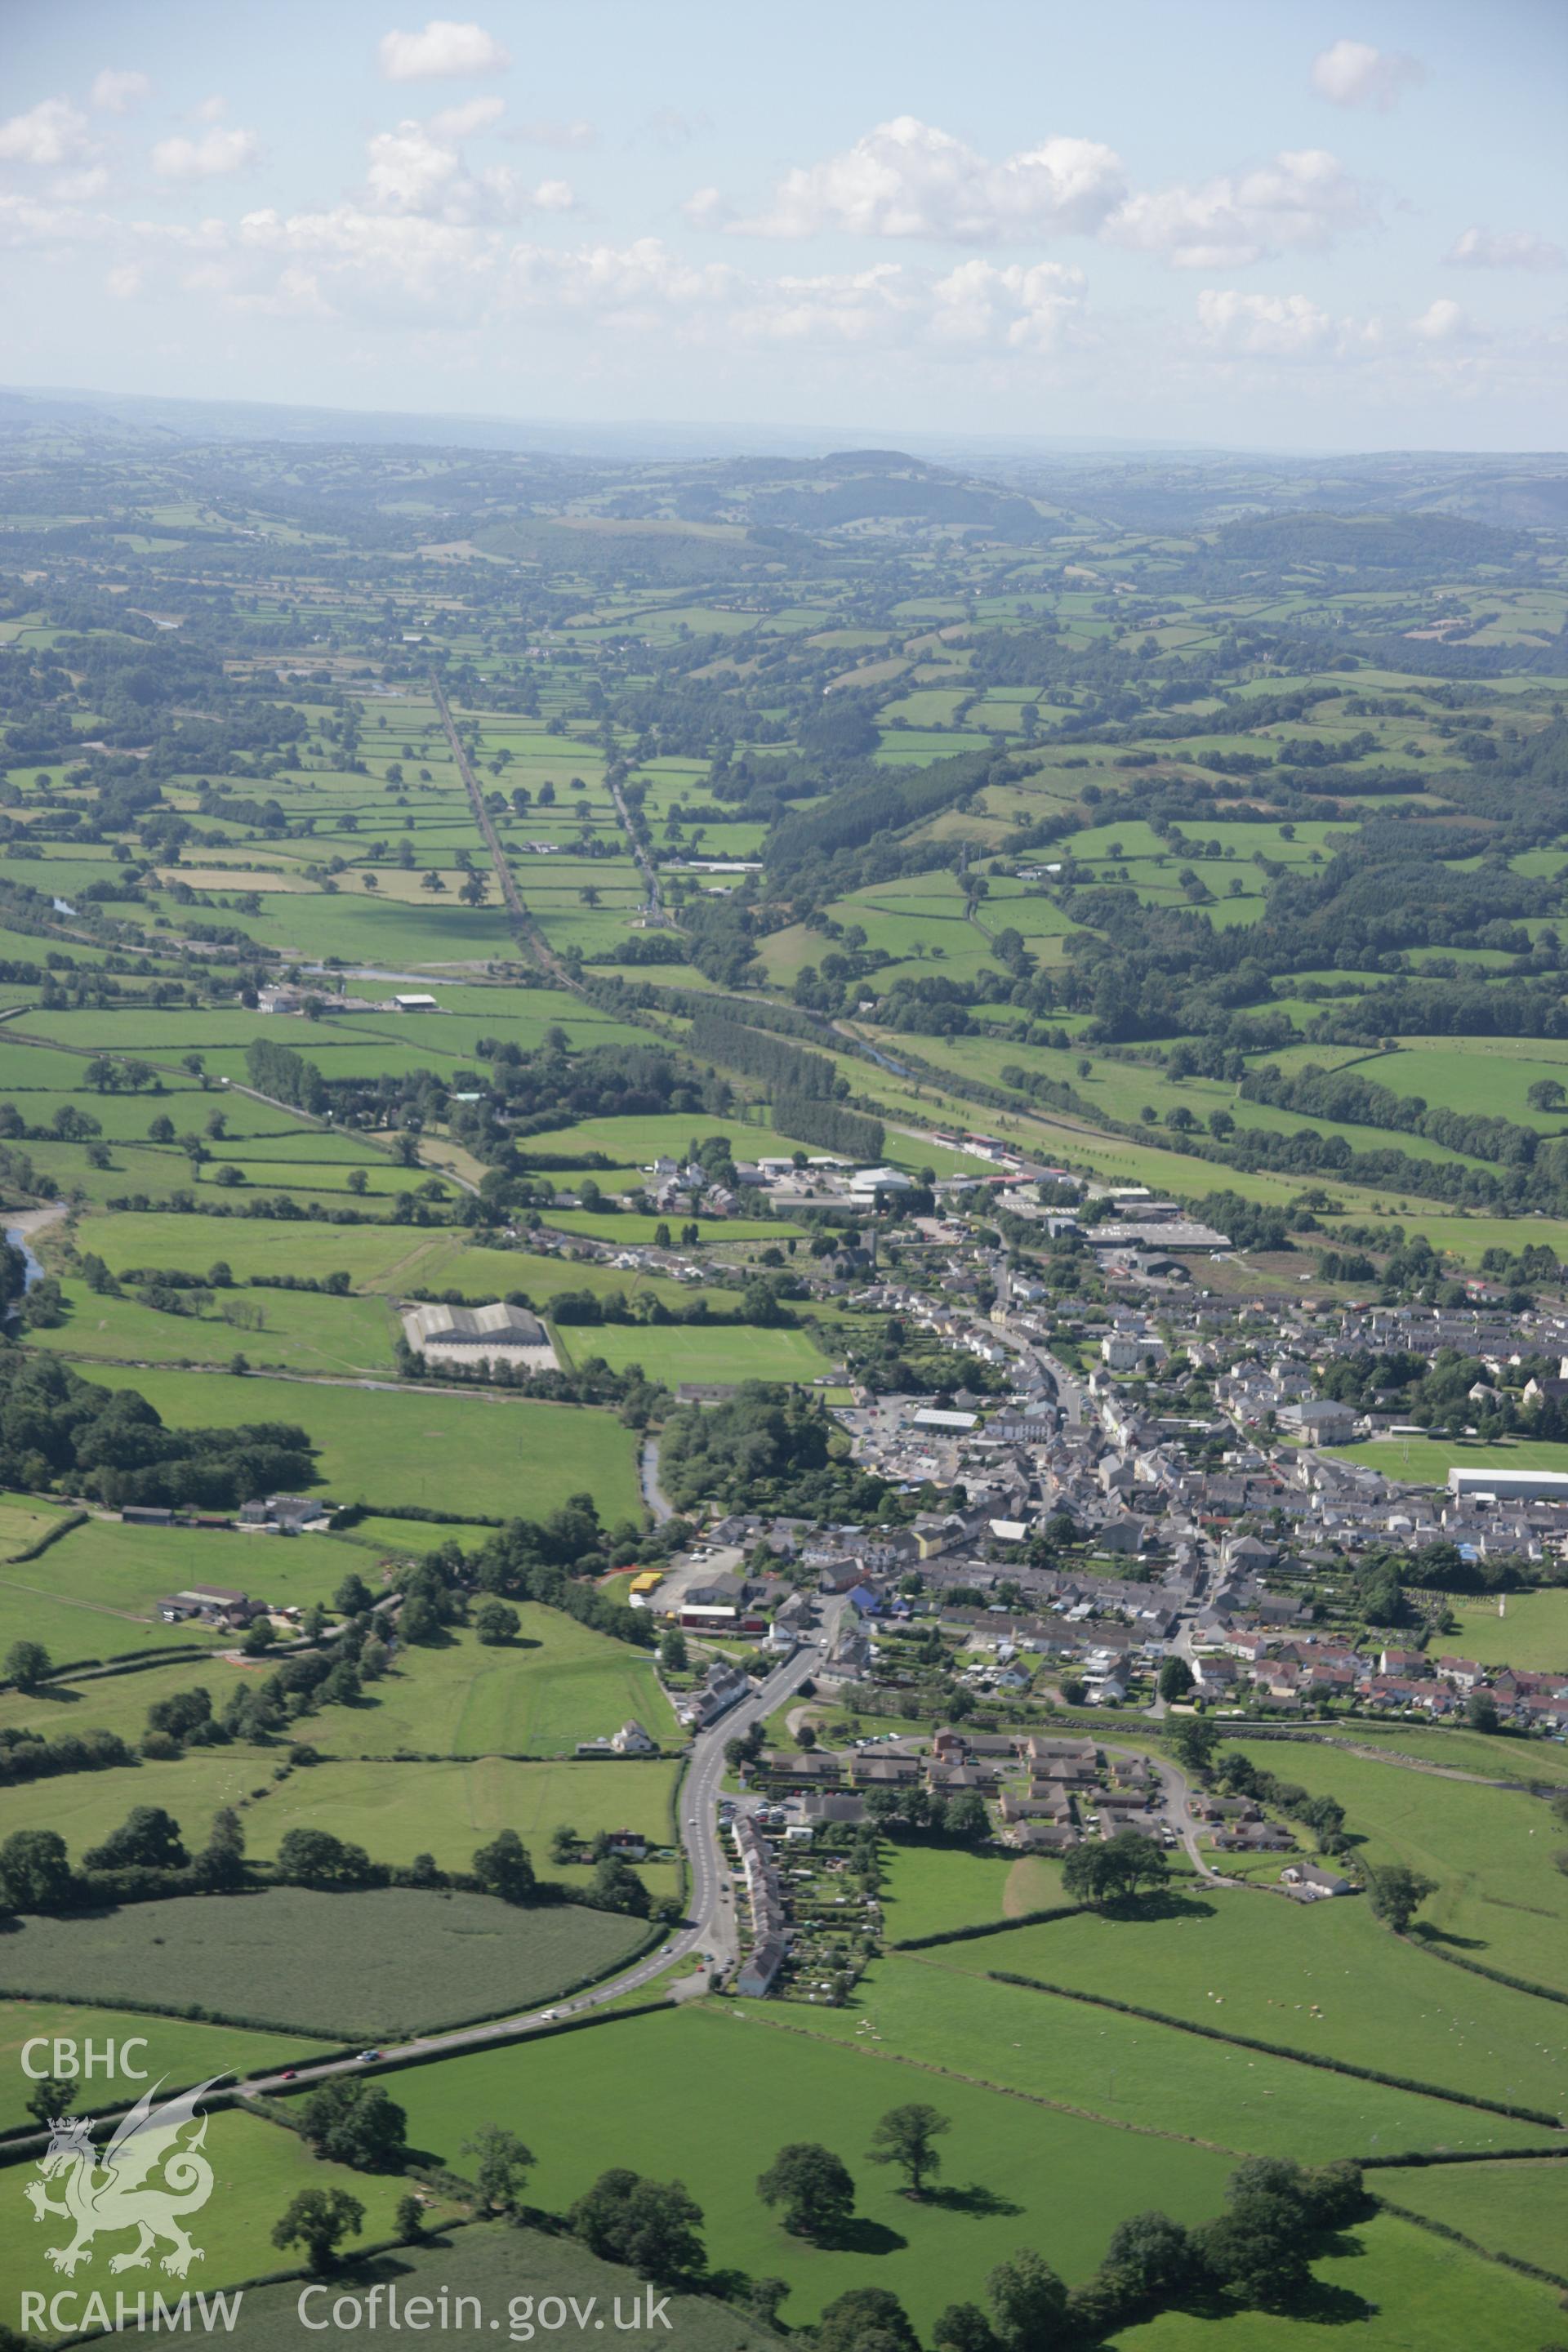 RCAHMW colour oblique aerial photograph of Llandovery townscape in general view from the east. Taken on 02 September 2005 by Toby Driver